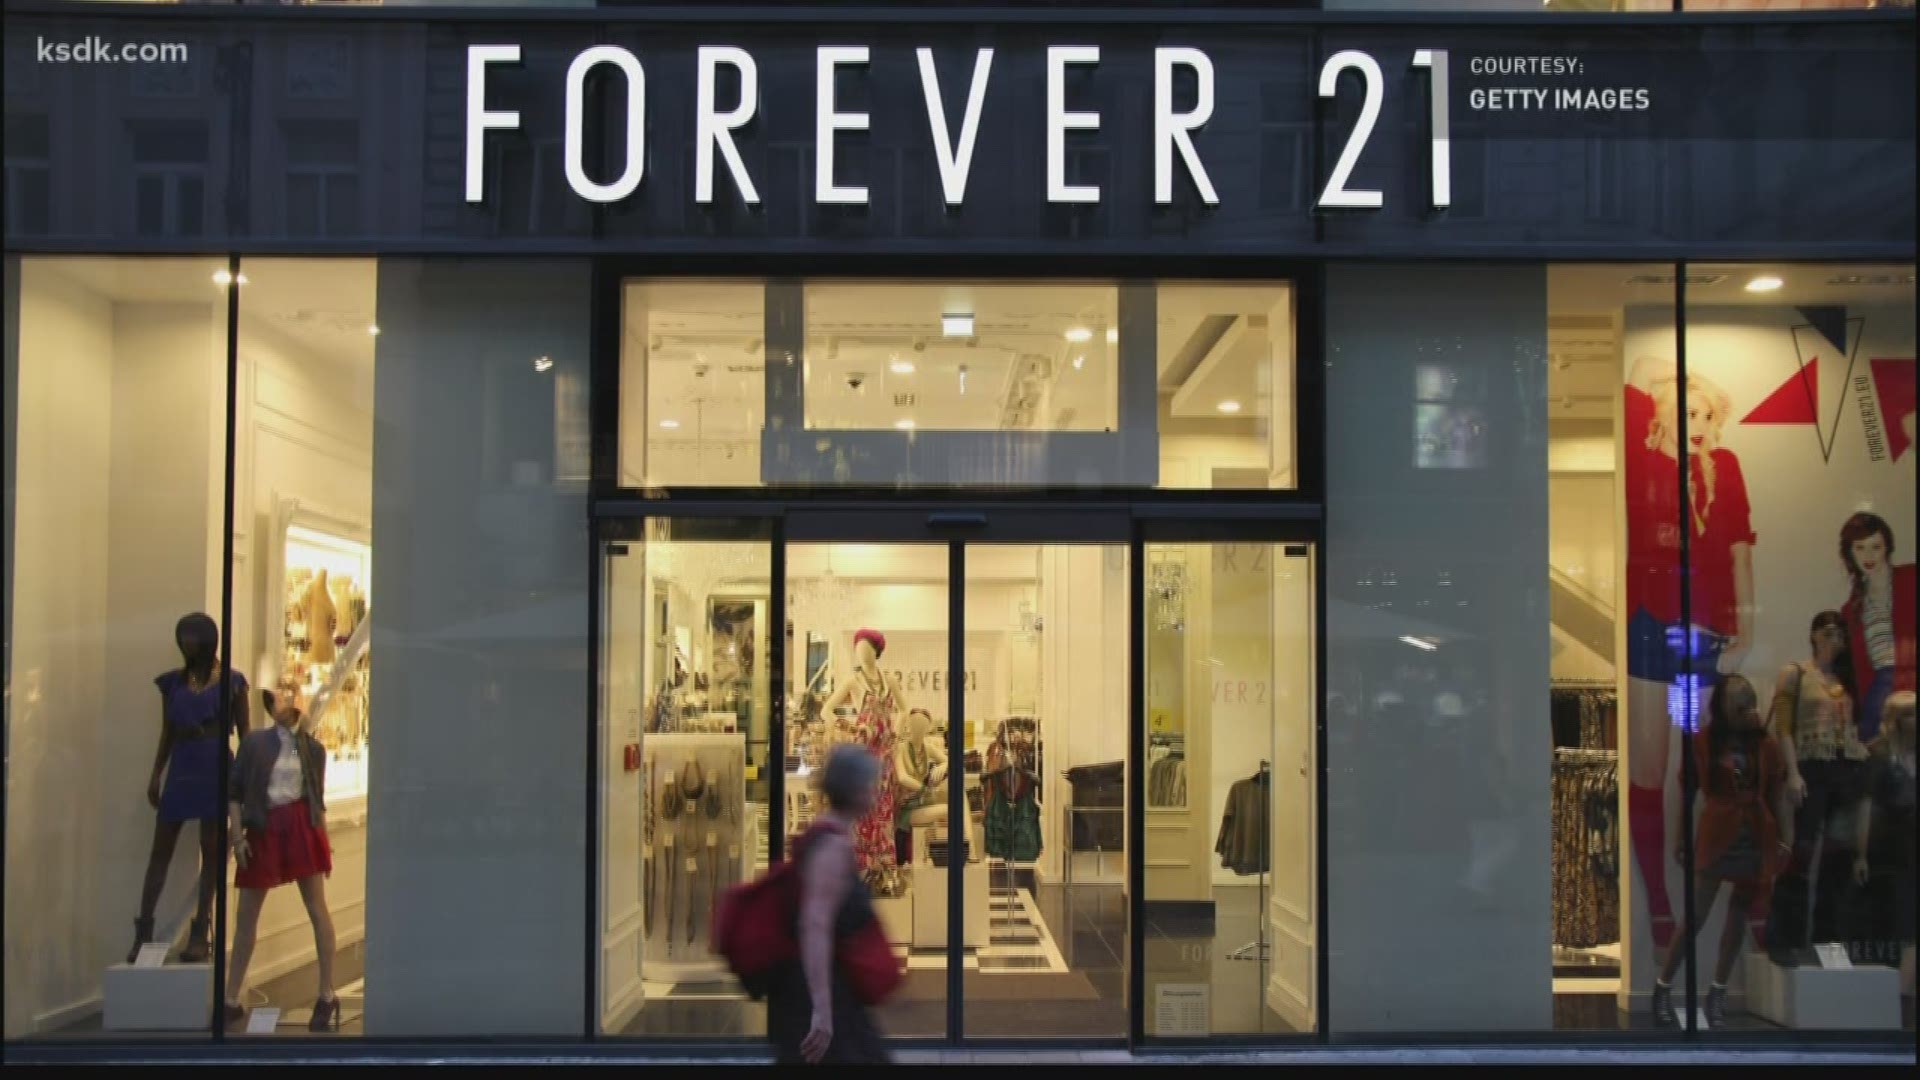 Forever 21 issued a statement since the Twitter battle, "The Freebie items in question were included in all online orders, across all sizes and categories, for a limited time and have since been removed."